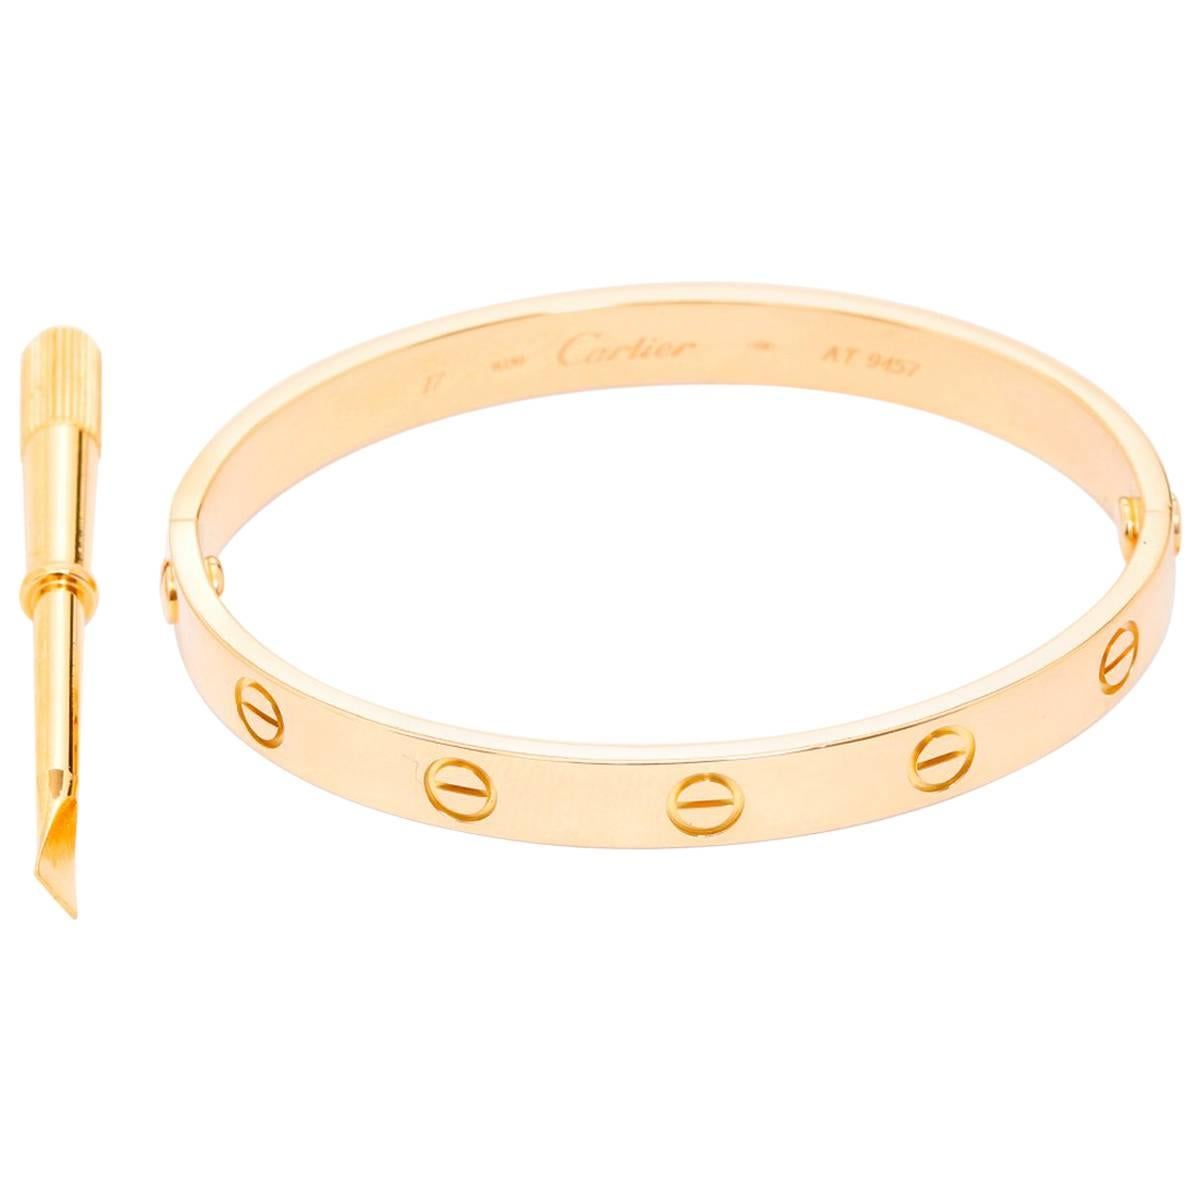 Cartier Love Bracelet Yellow Gold with Screwdriver